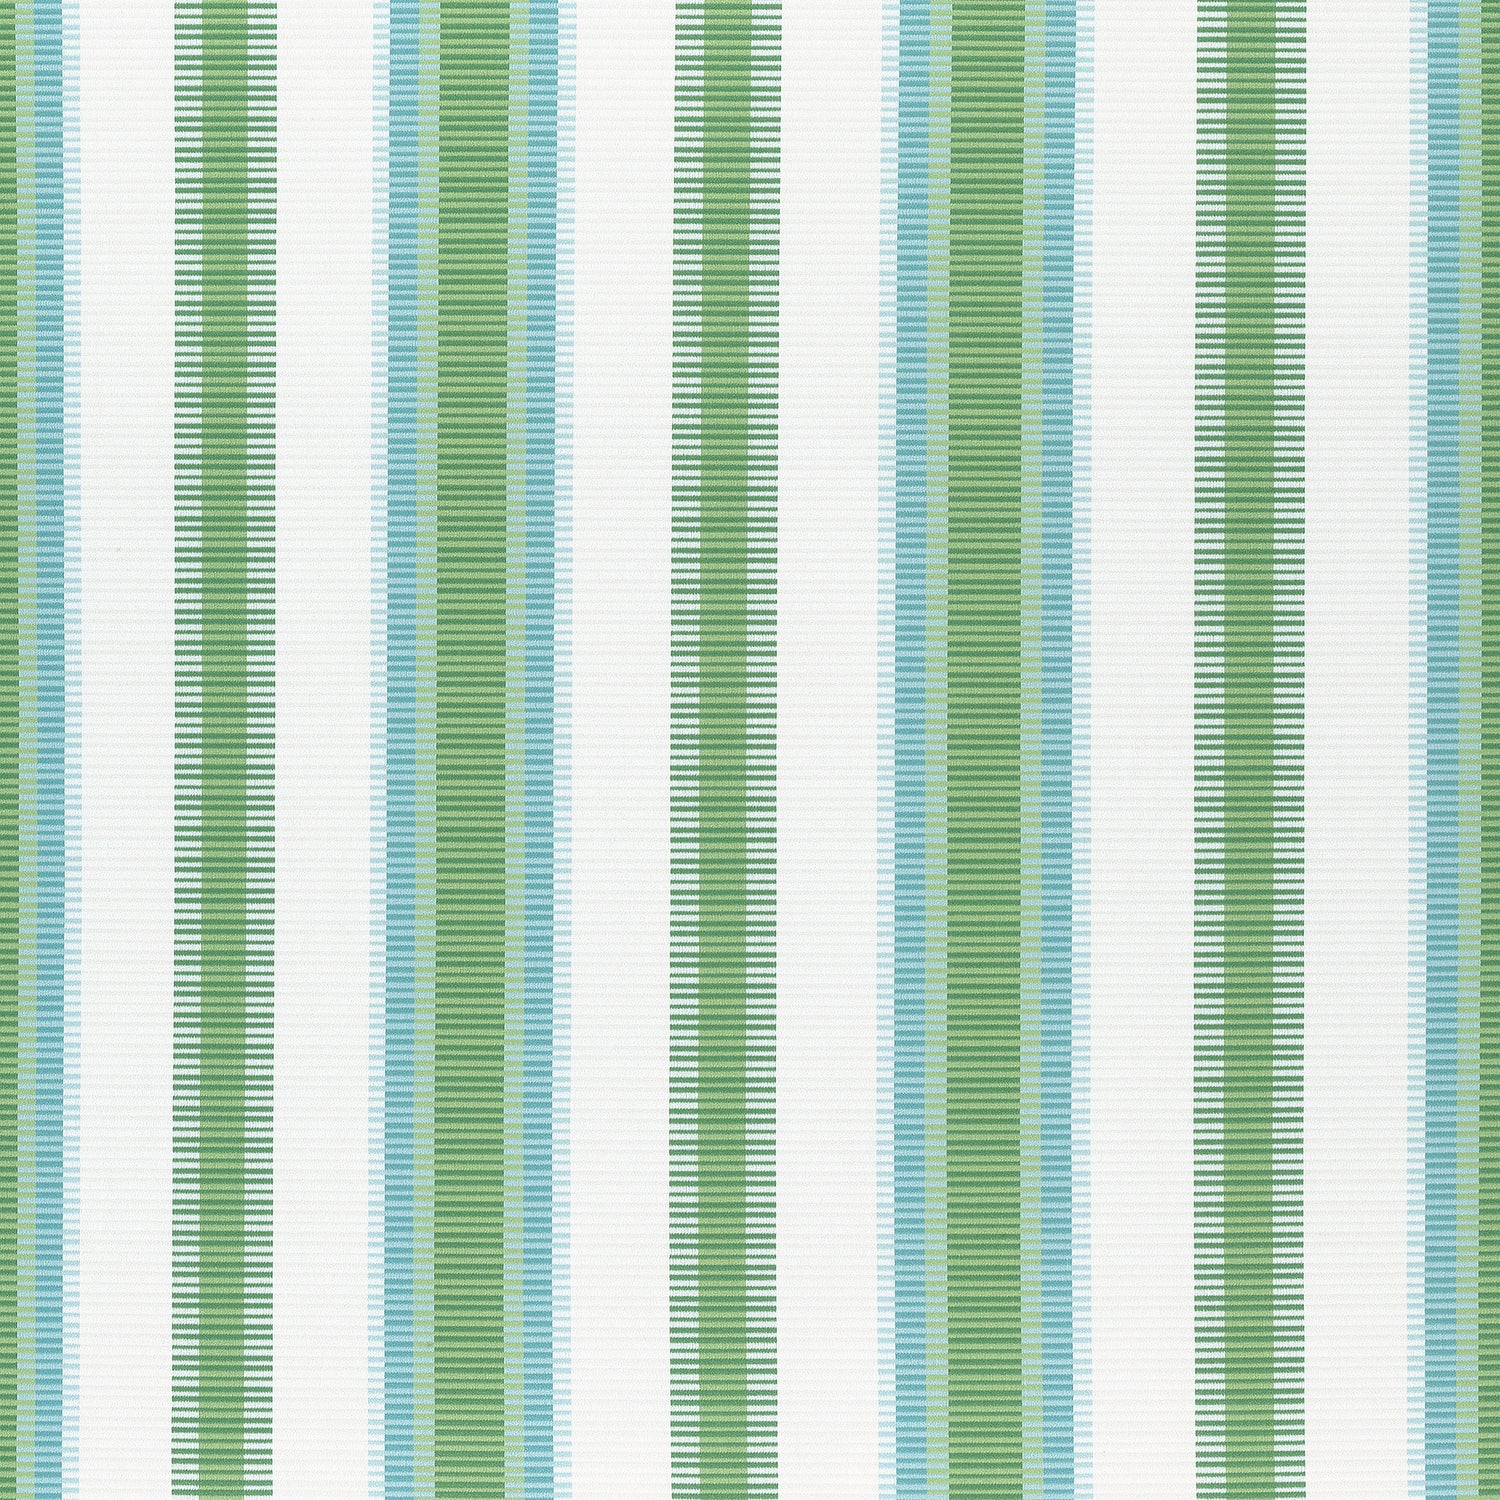 Samba Stripe fabric in kelly green and pool color - pattern number W74672 - by Thibaut in the Festival collection